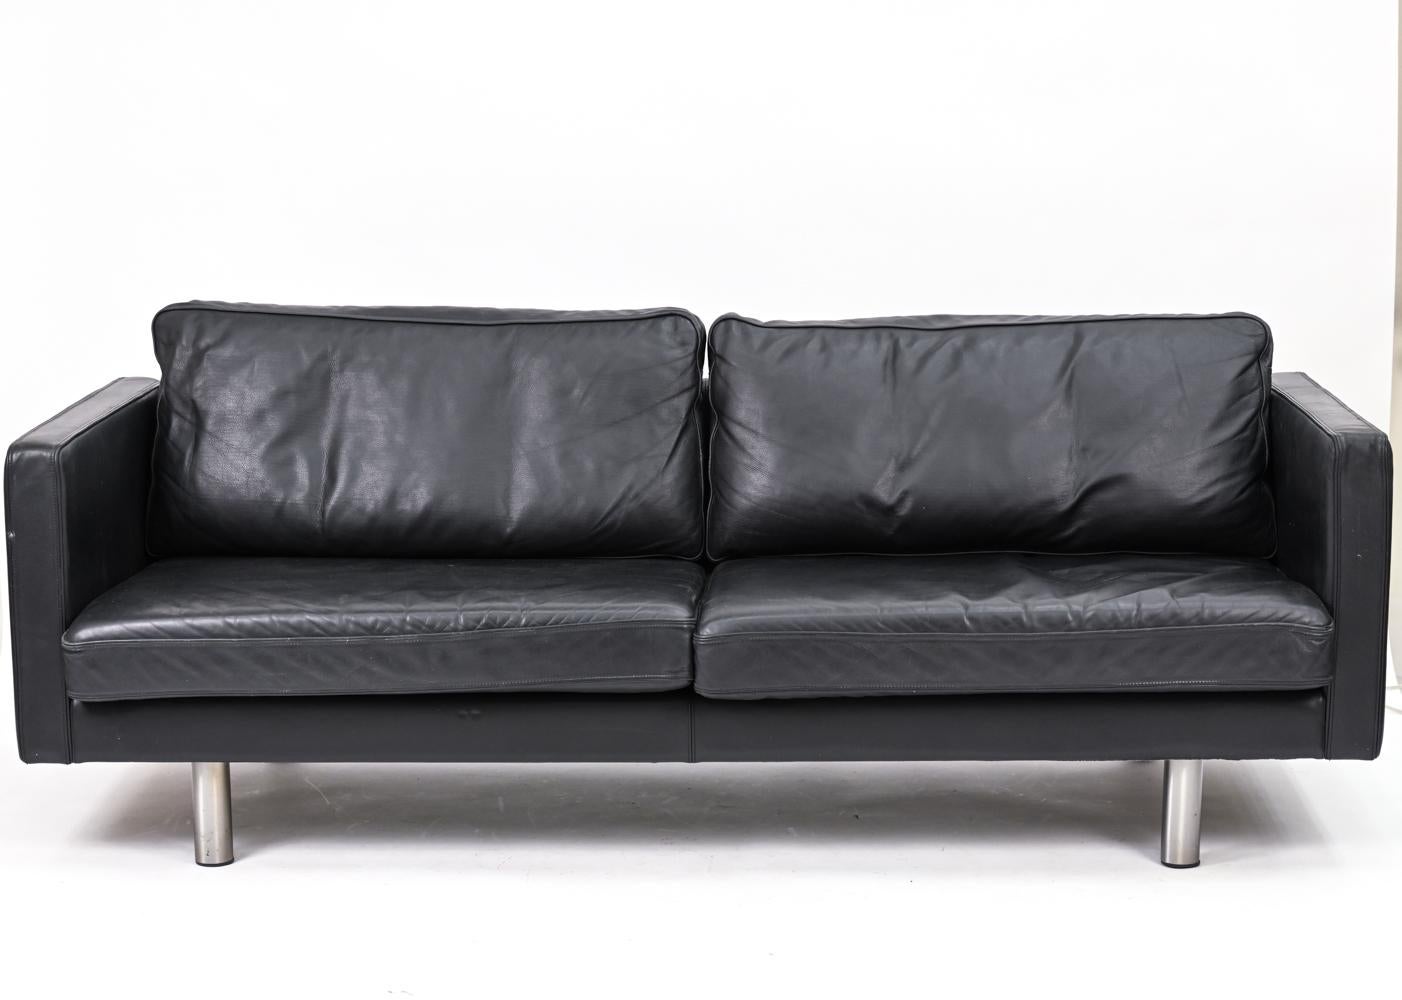 The epitome of the Scandinavian modern box sofa, Erik Jorgensen's EJ220 A sofa features two long seat cushions to complement the sofa's long linear form. In supple black leather with steel legs. Designed in the 1970's, this sofa is continually